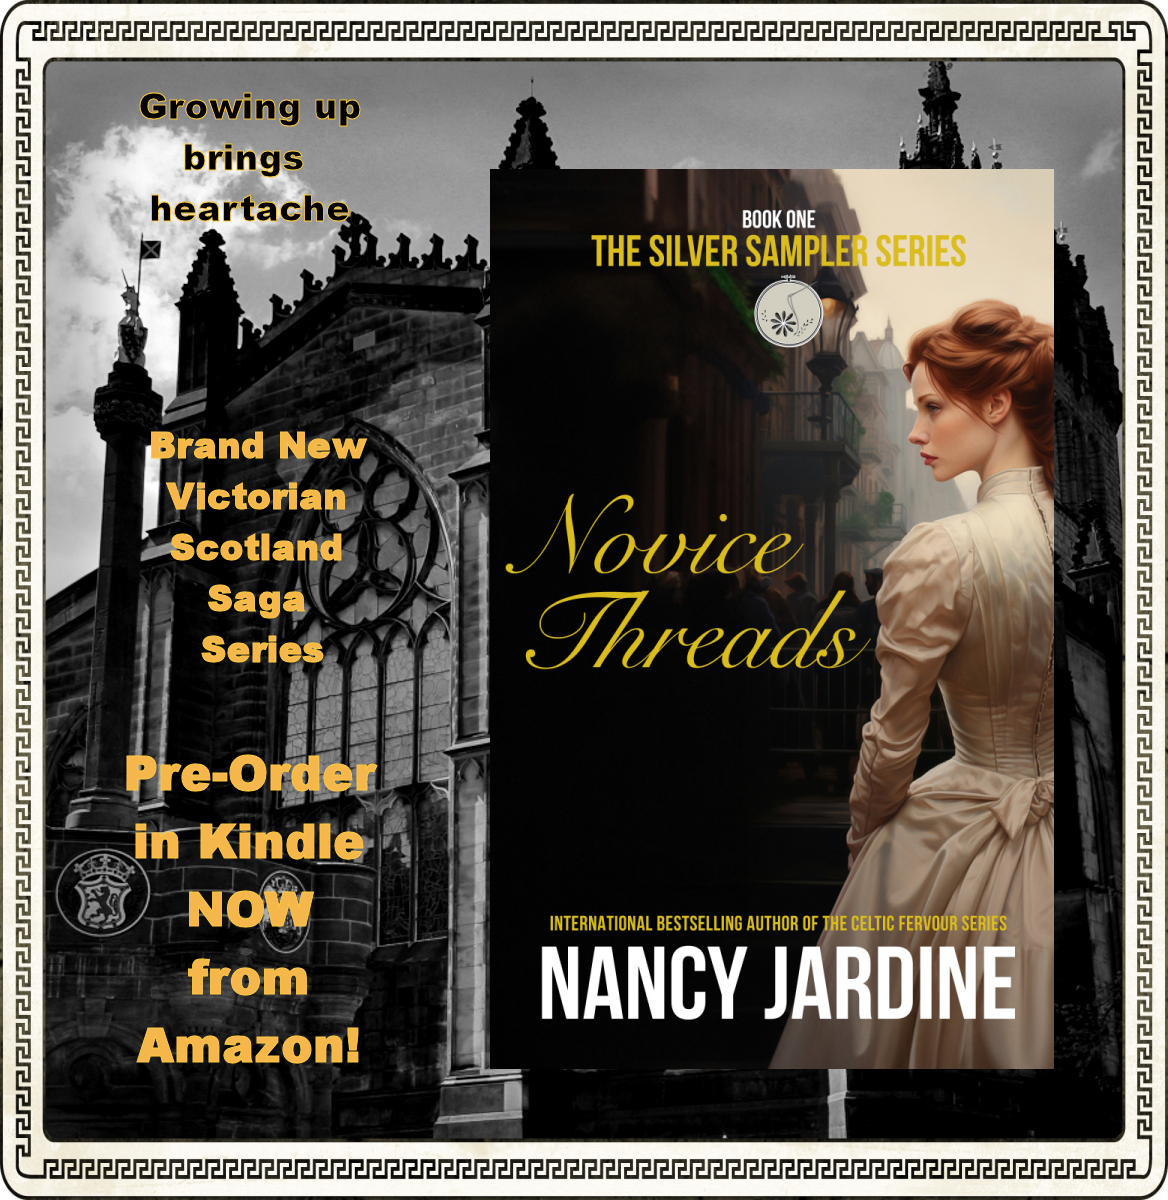 Brand New Saga Fiction Series
PRE-ORDER Novice Threads in Kindle £1.99!
Set in Victorian Scotland, meet young Margaret Law whose life takes an unexpected turn, or two, and more! 
#comingofagefiction #sagafiction #HistoricalFiction 
mybook.to/NTsss